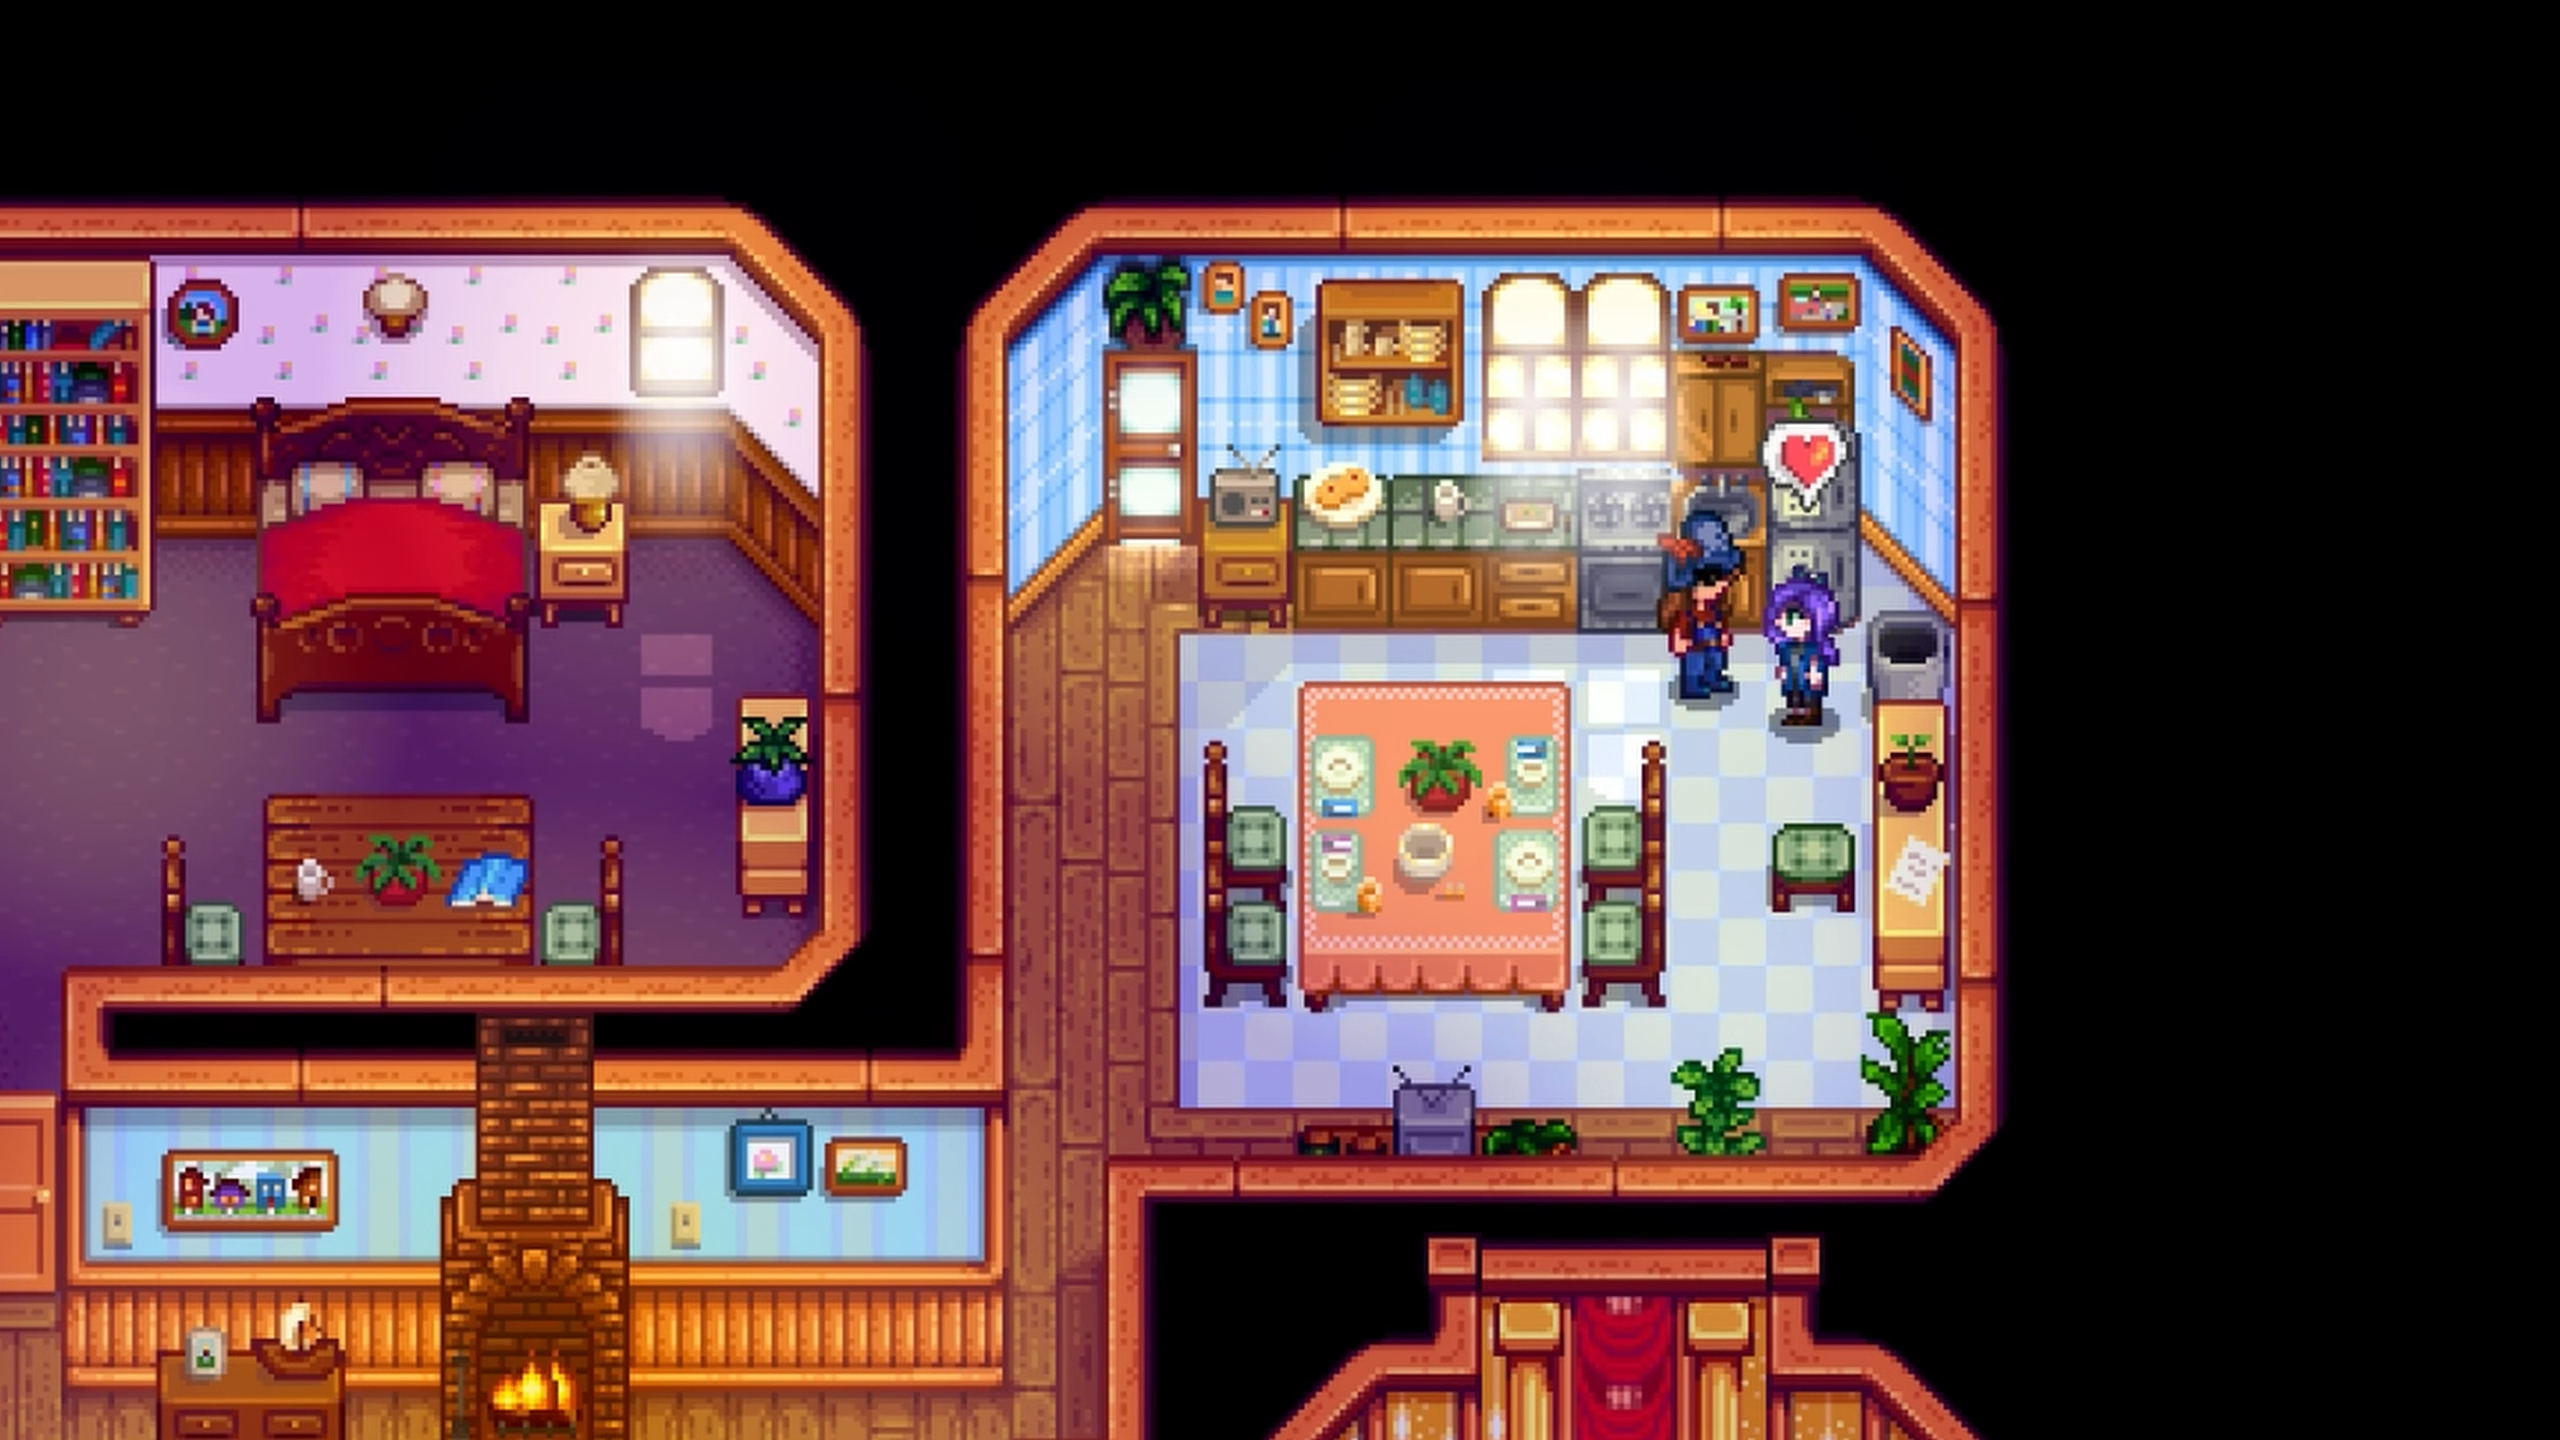 Abigail in Stardew Valley with a heart over her head.